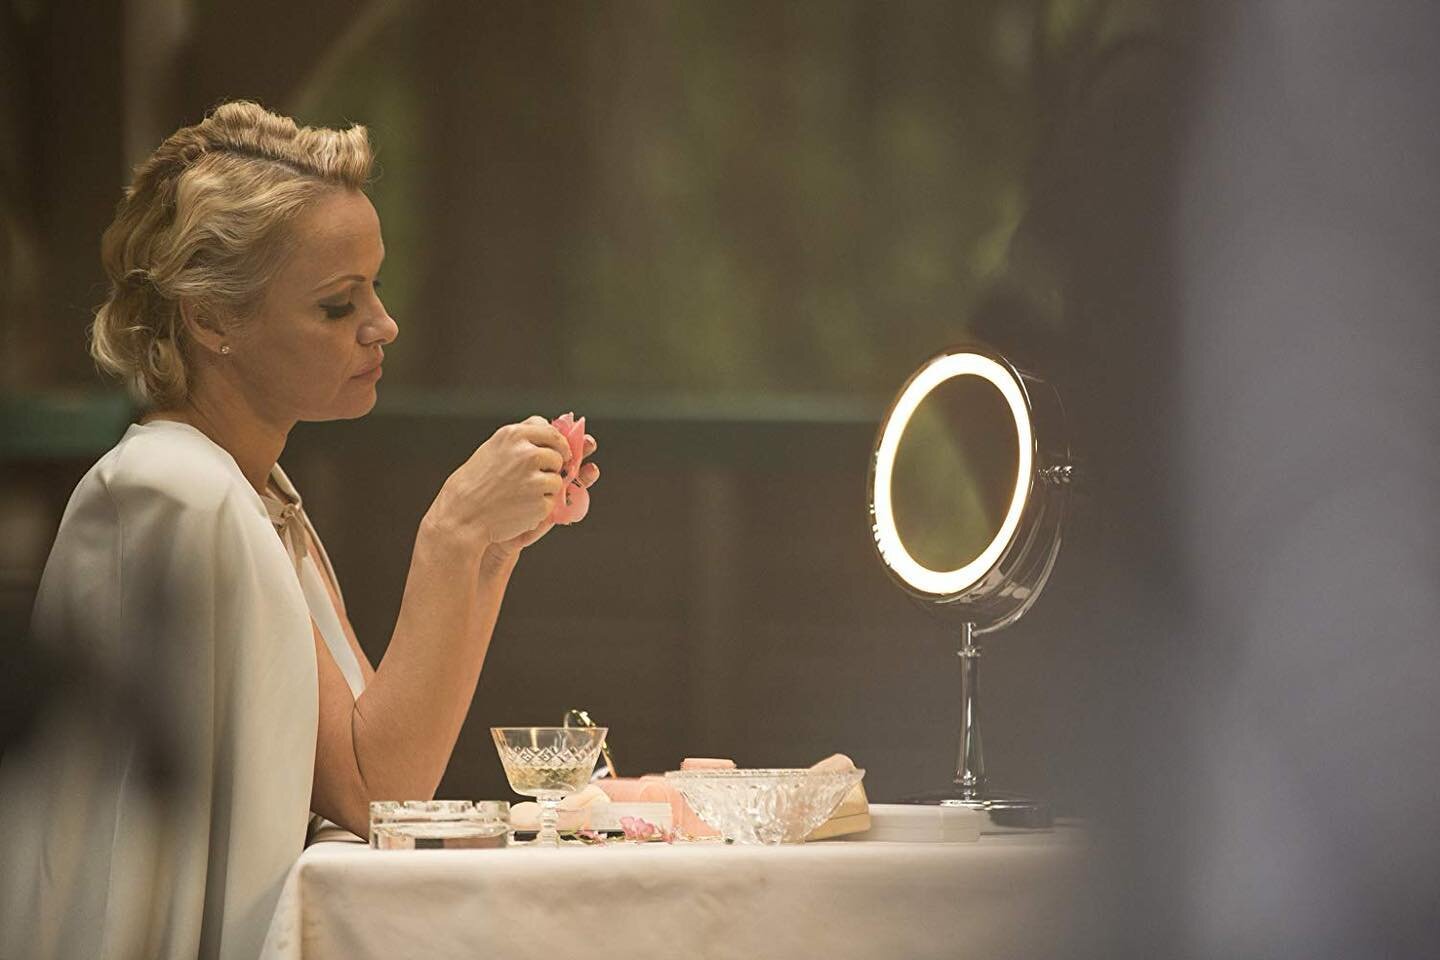 If only we could all get ready for work on Monday&rsquo;s like Pamela Anderson *sigh* 

#thepeoplegardenmovie #pamelaanderson